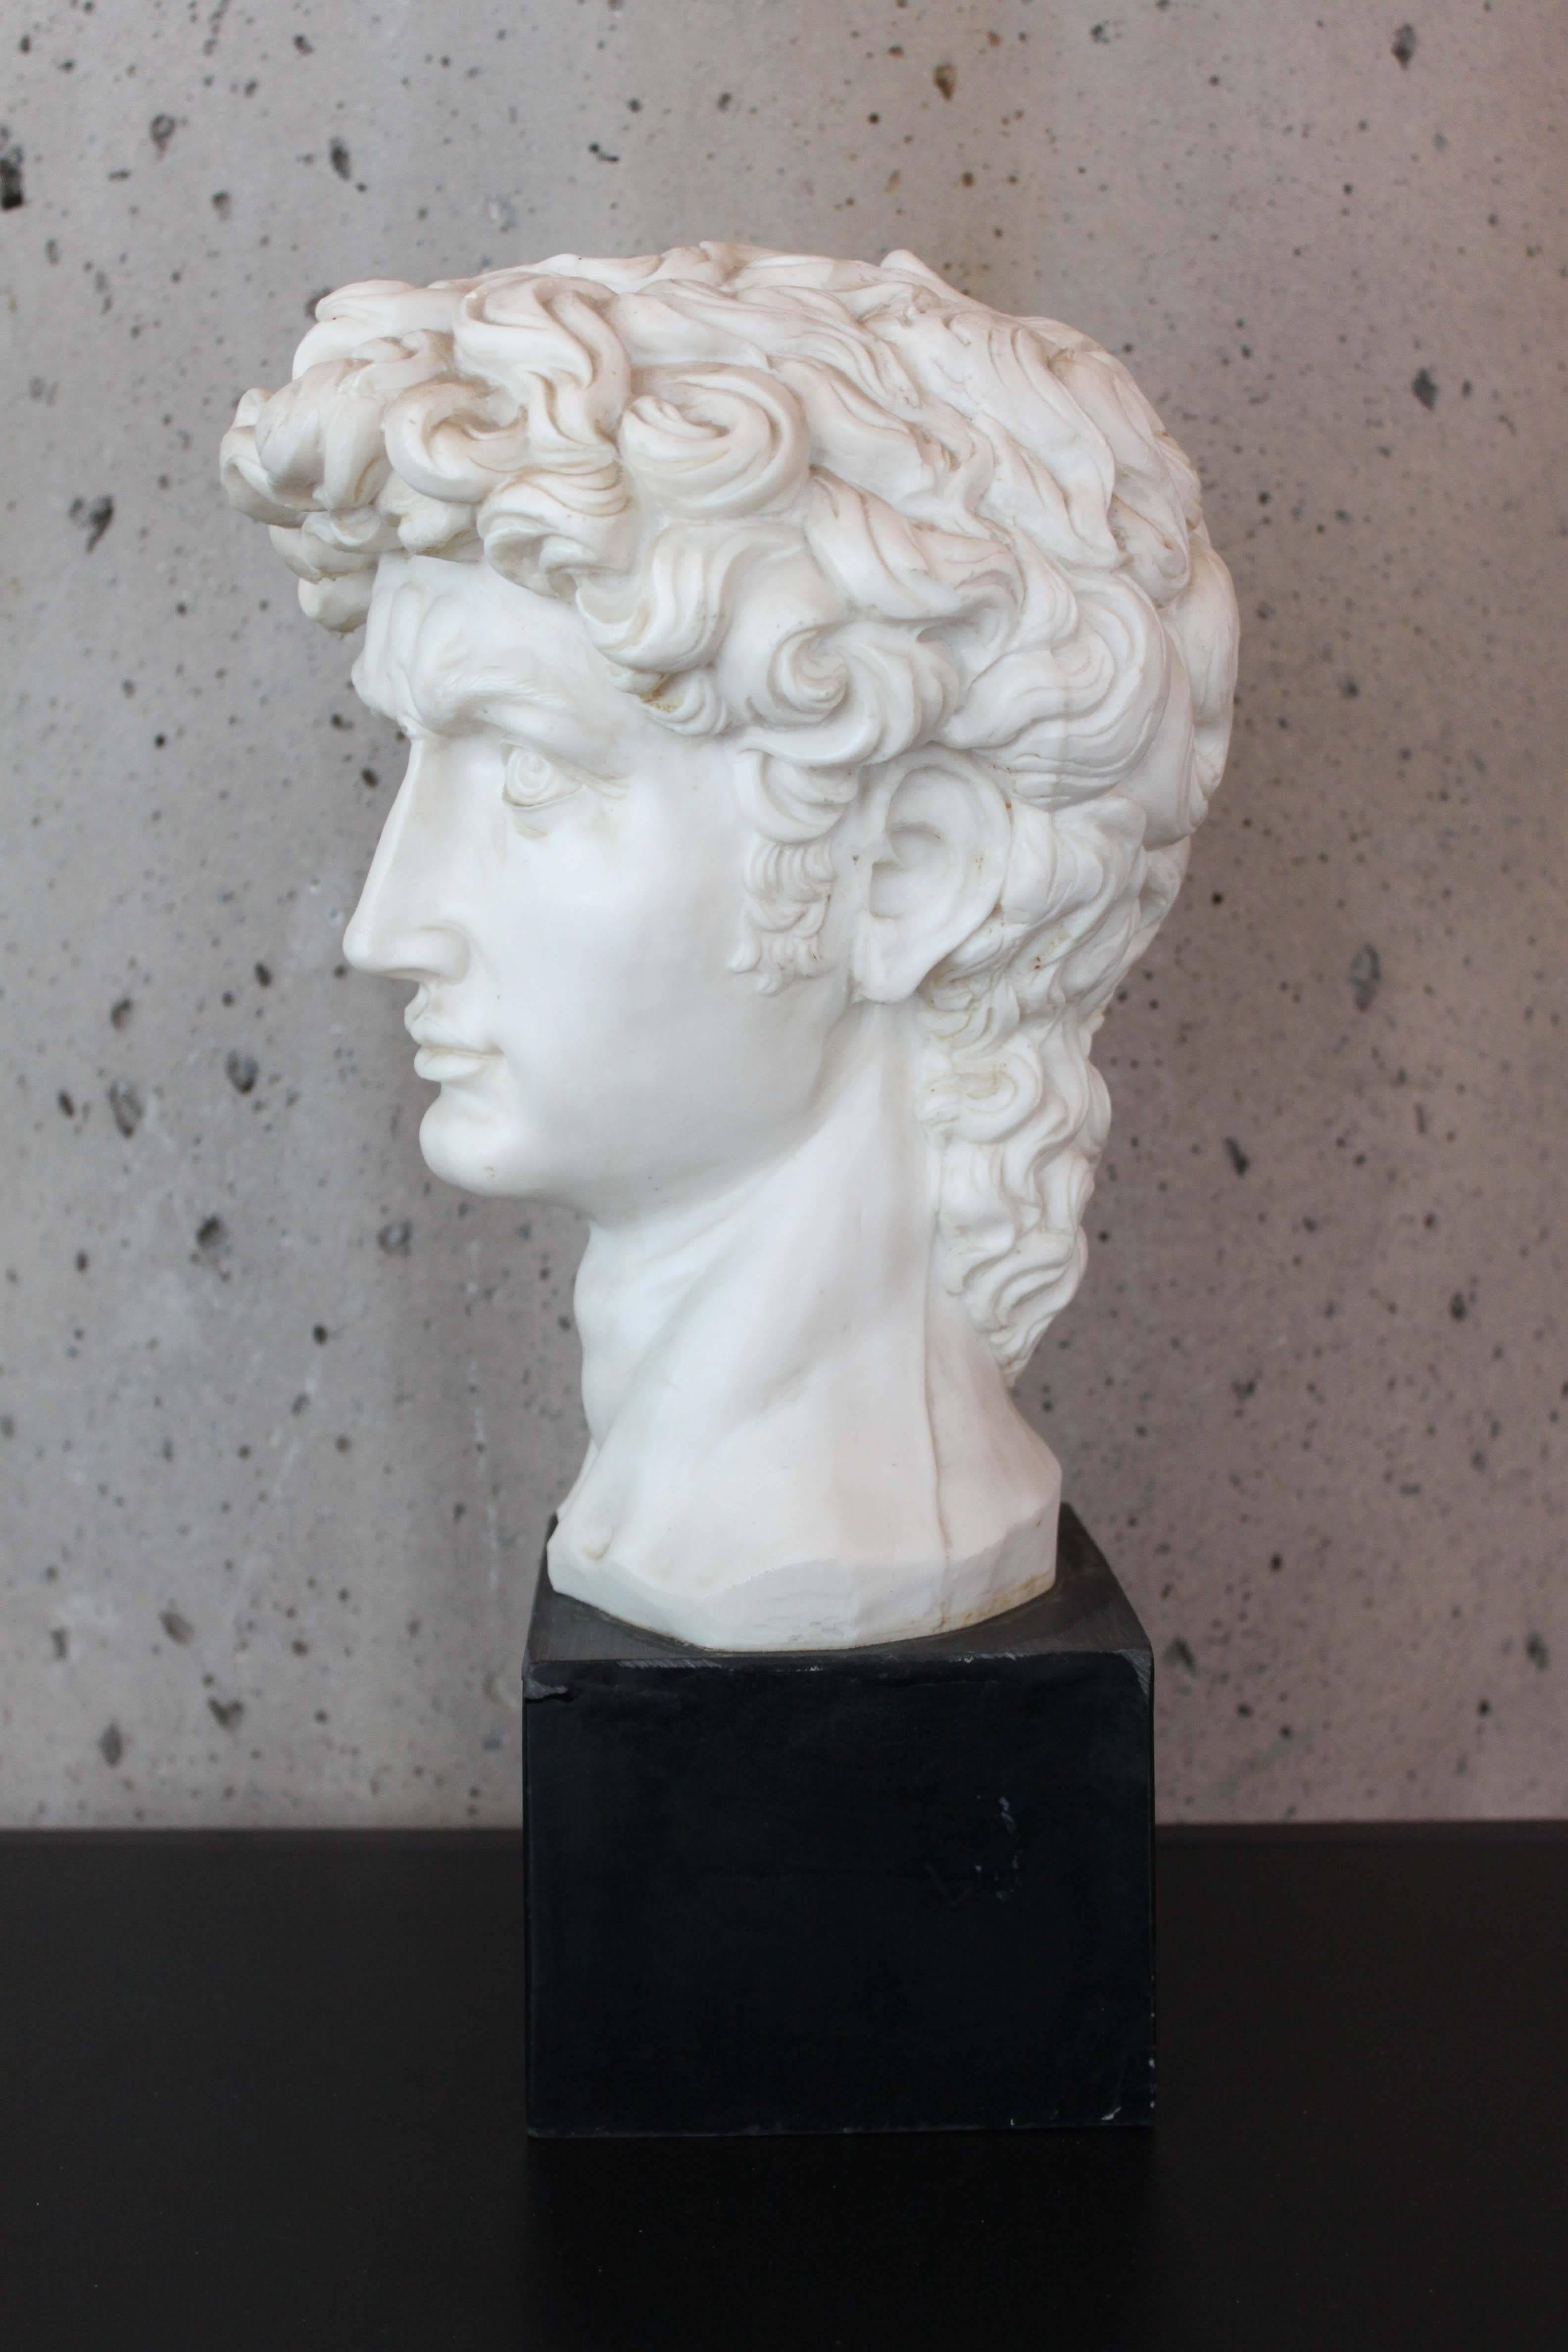 Vintage neoclassical bust cast out what looks to be epoxy. Could have been a model or trial piece for a foundry. Excellent overall condition and highly decorative. Mounted on a square wooden plinth.